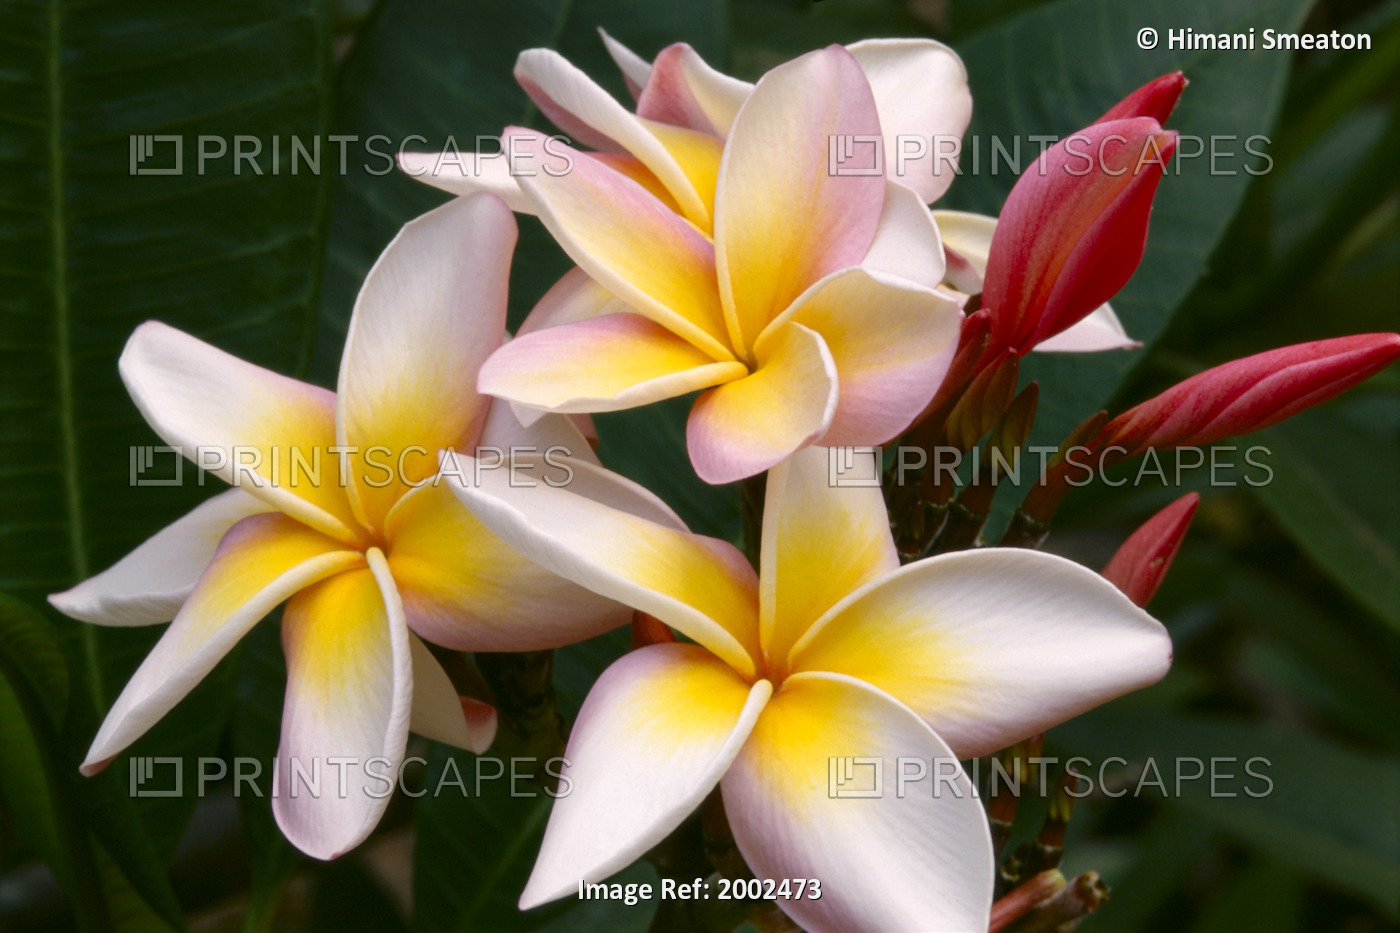 Soft Focus Of White Plumeria Flowers With Pale Yellow Centers, Dark Pink Buds